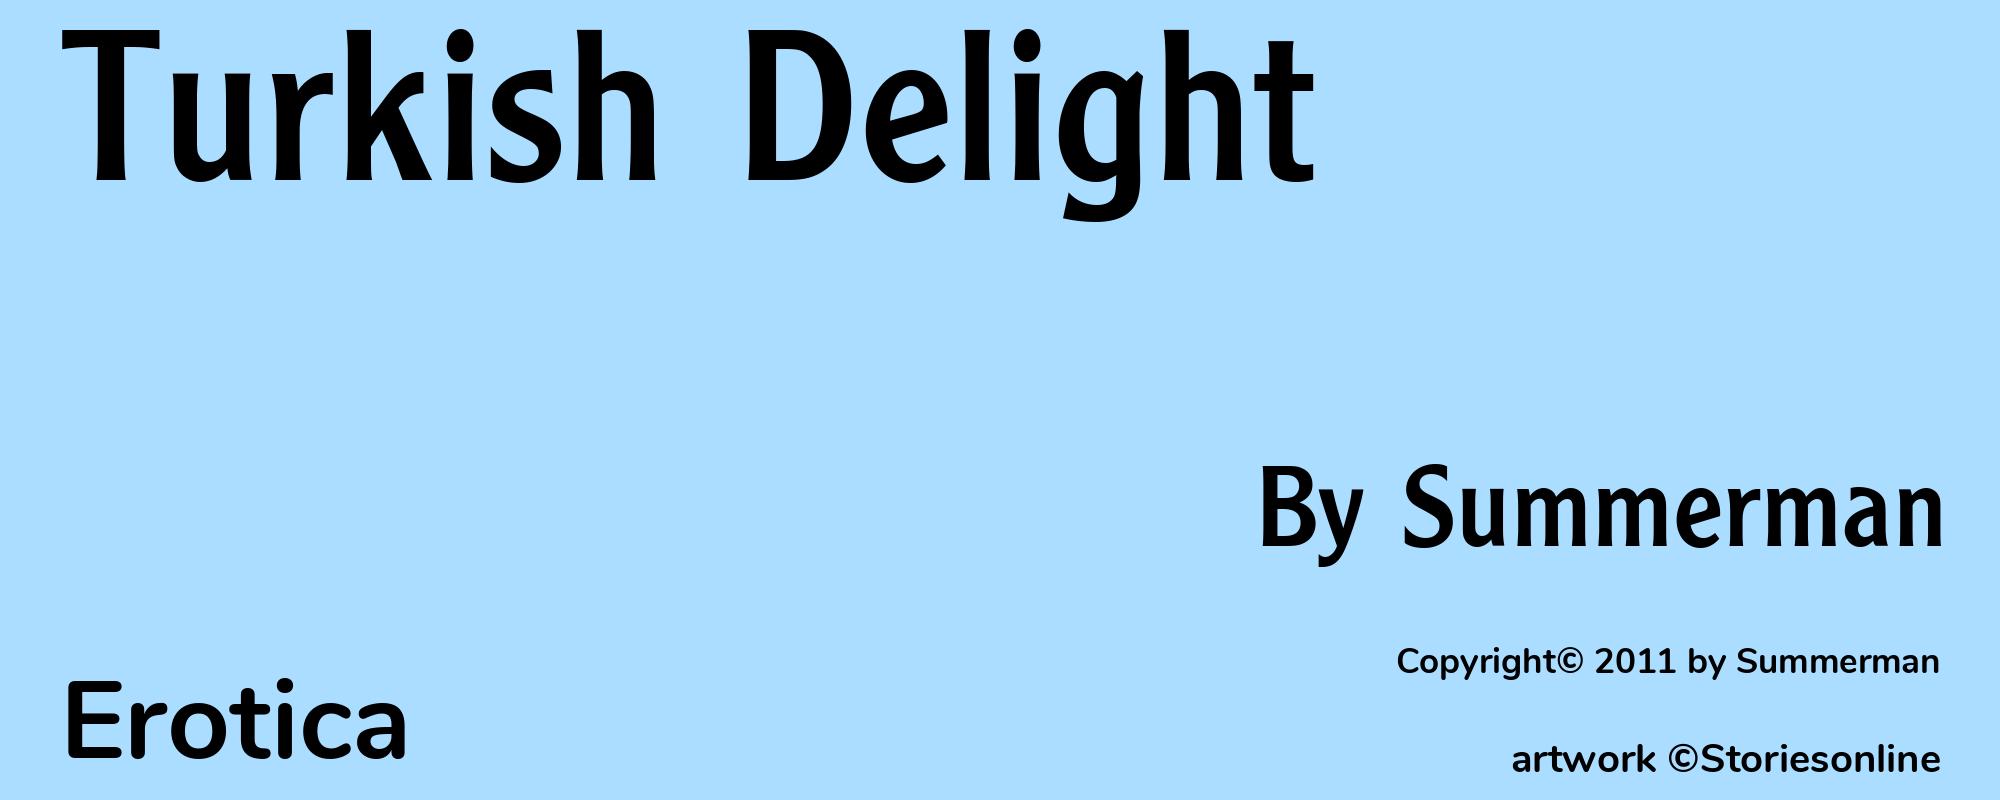 Turkish Delight - Cover